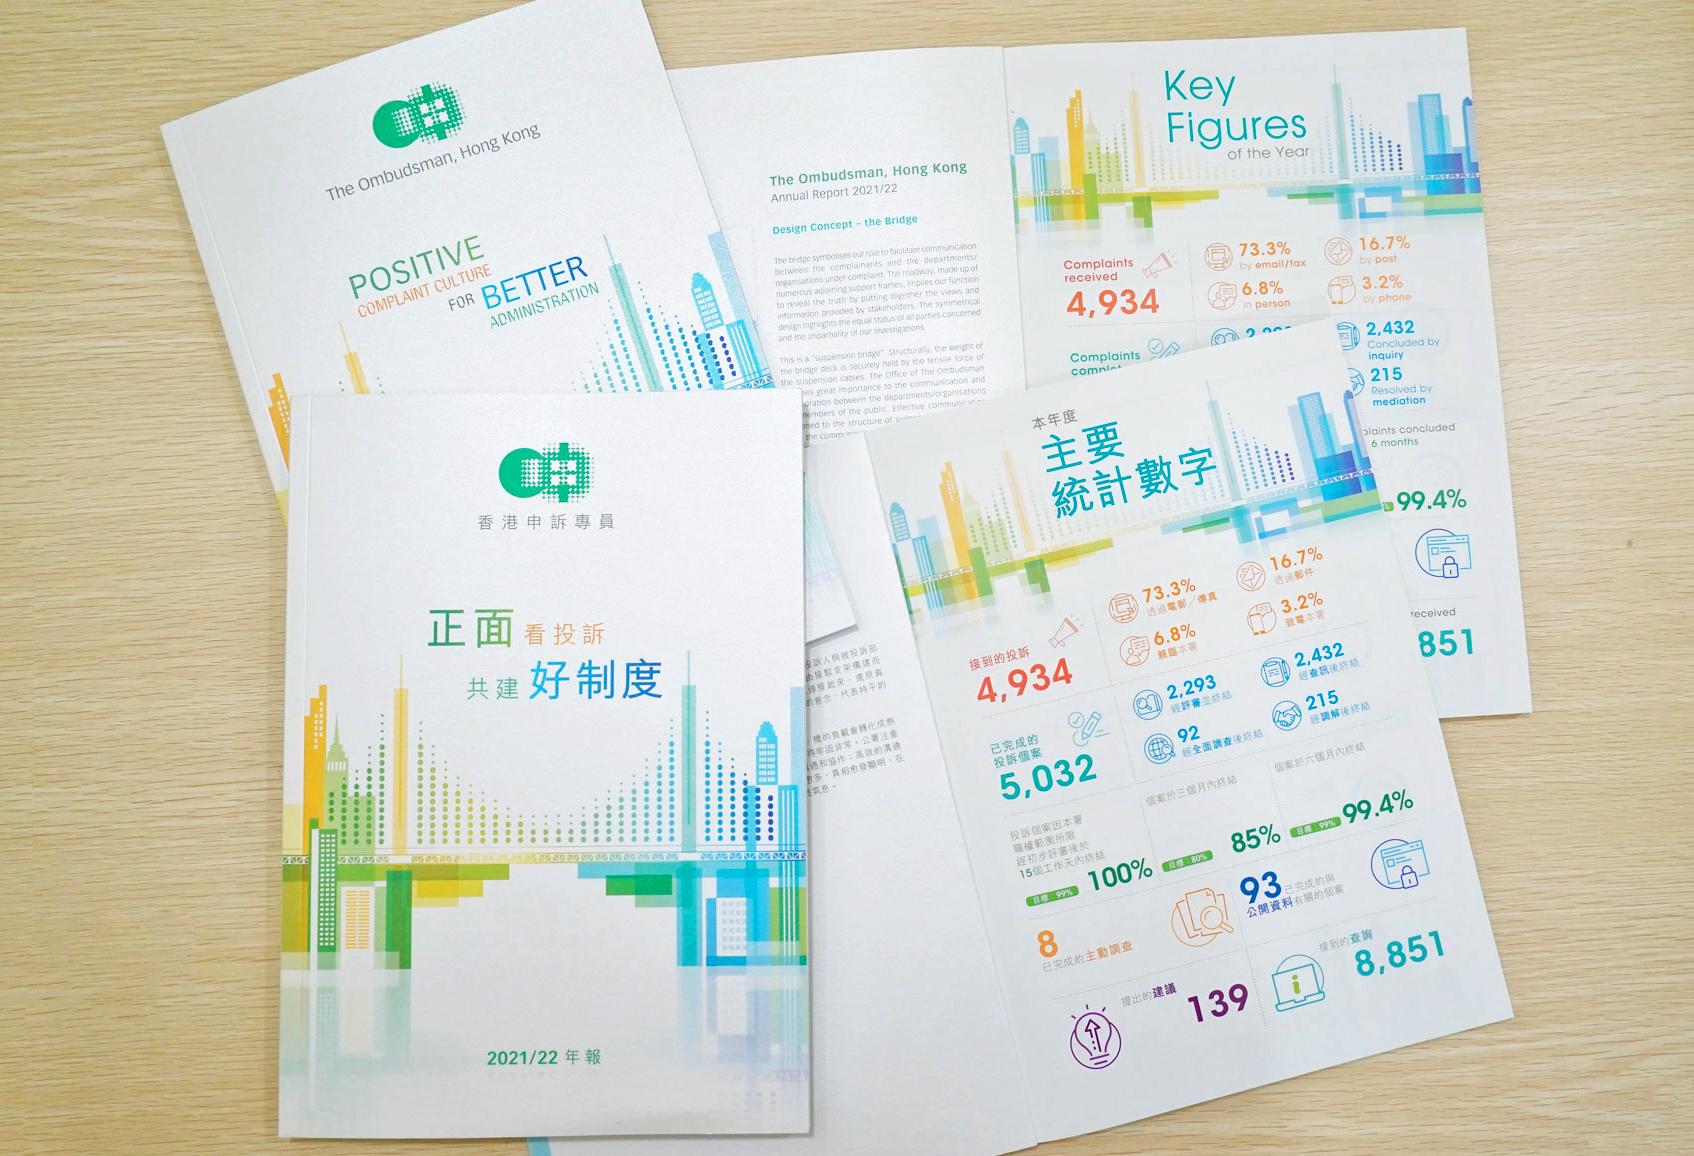 The Annual Report of The Ombudsman, Hong Kong 2021/22 was published today (July 13).